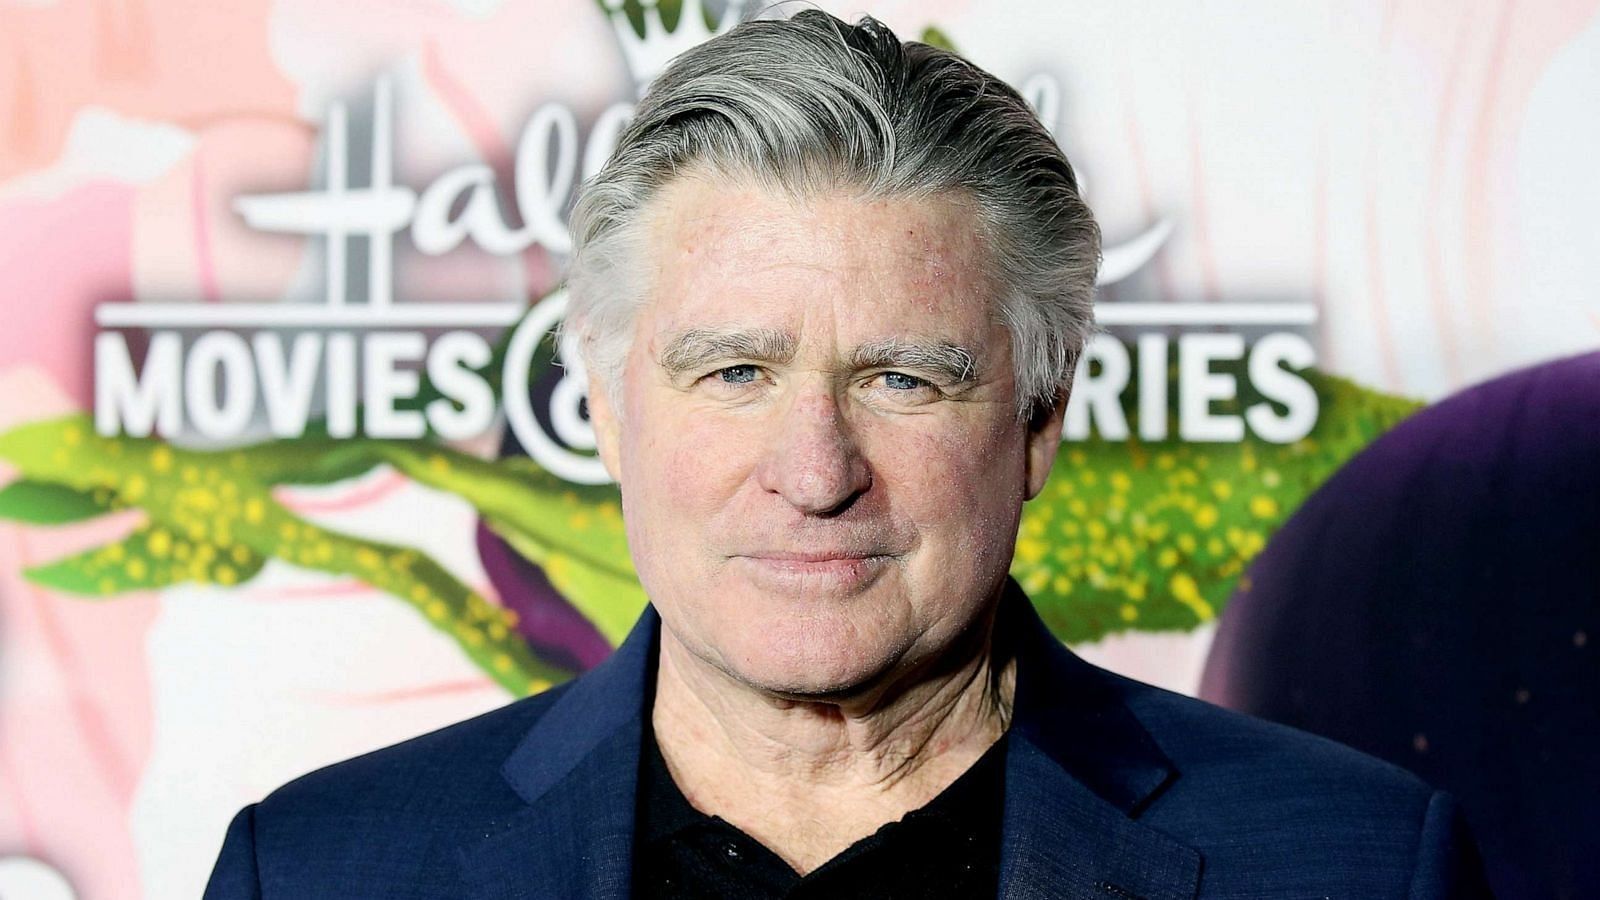 Treat Williams passes away after encountering fatal motorcycle accident (Image via Getty Images)